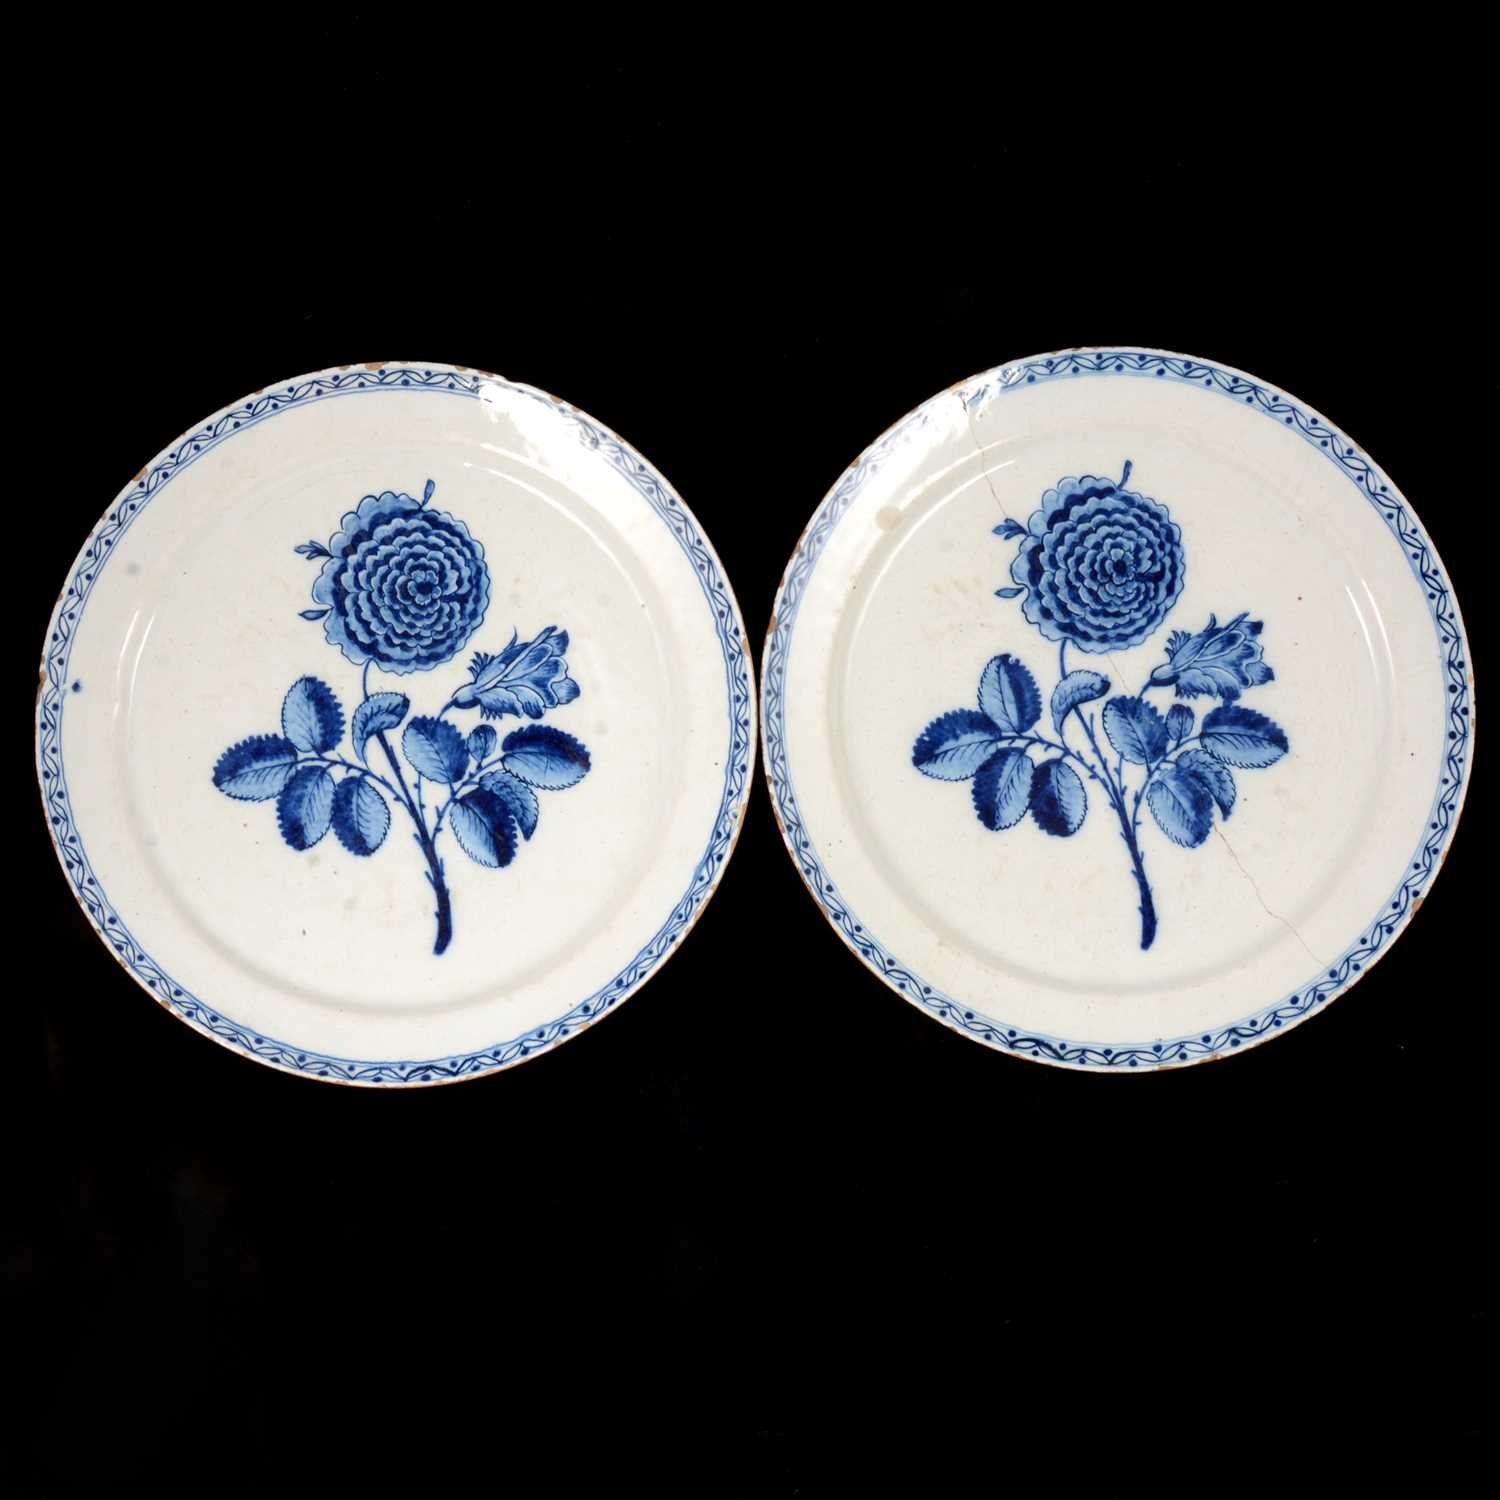 Lot 80 - A pair of large English delft blue and white plates